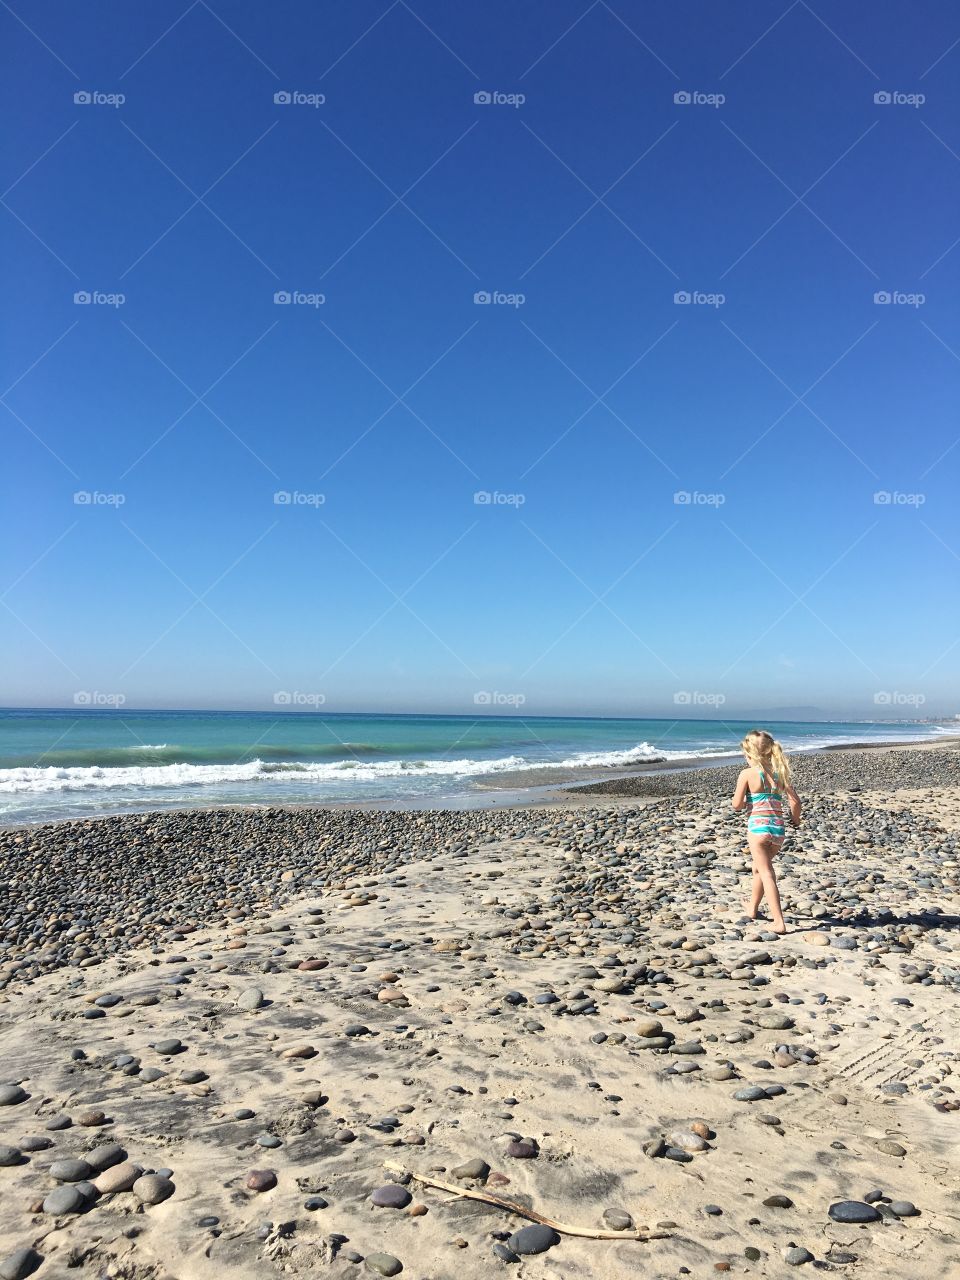 A classic style photo of a girl approaching the shoreline on a rocky beach.